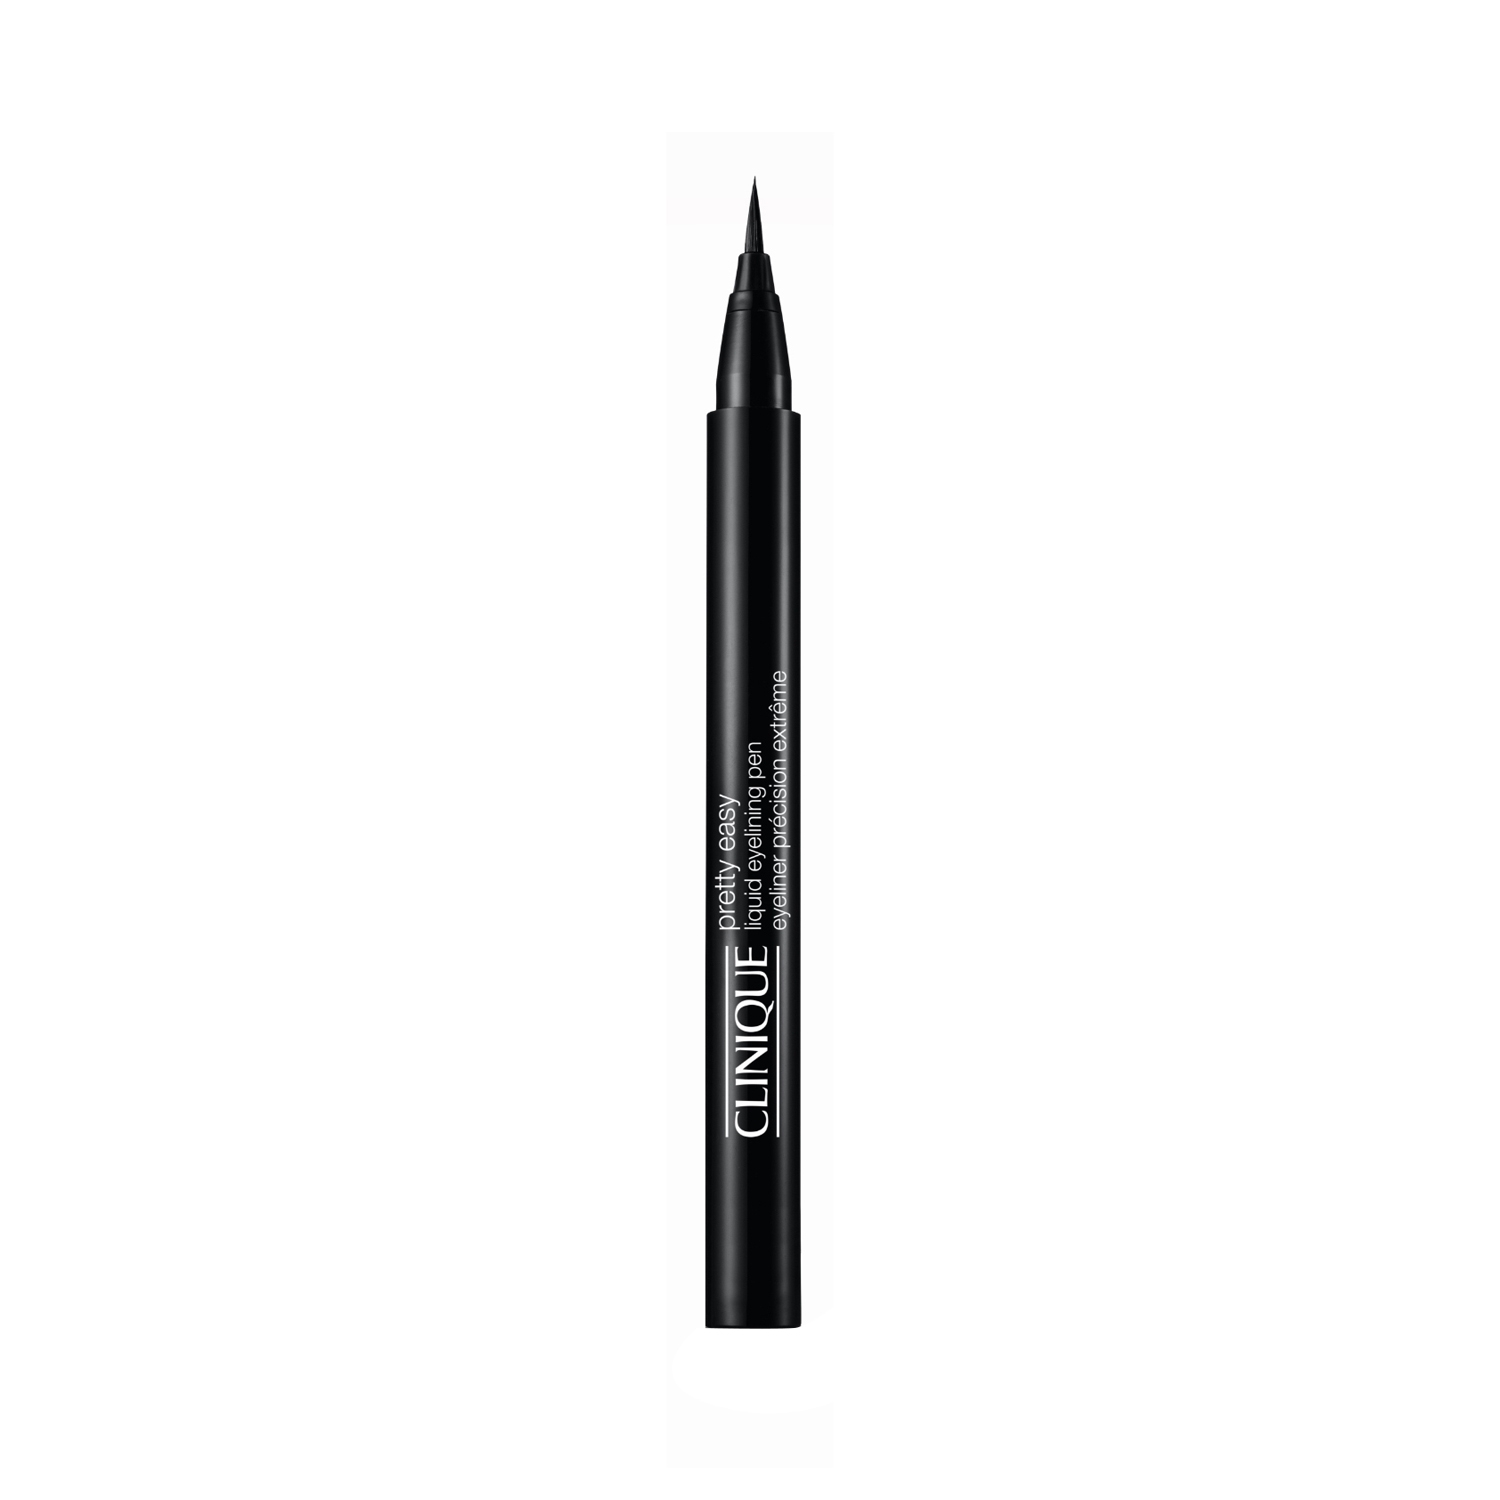 Clinique For Eyes - Really Black (0.30g)